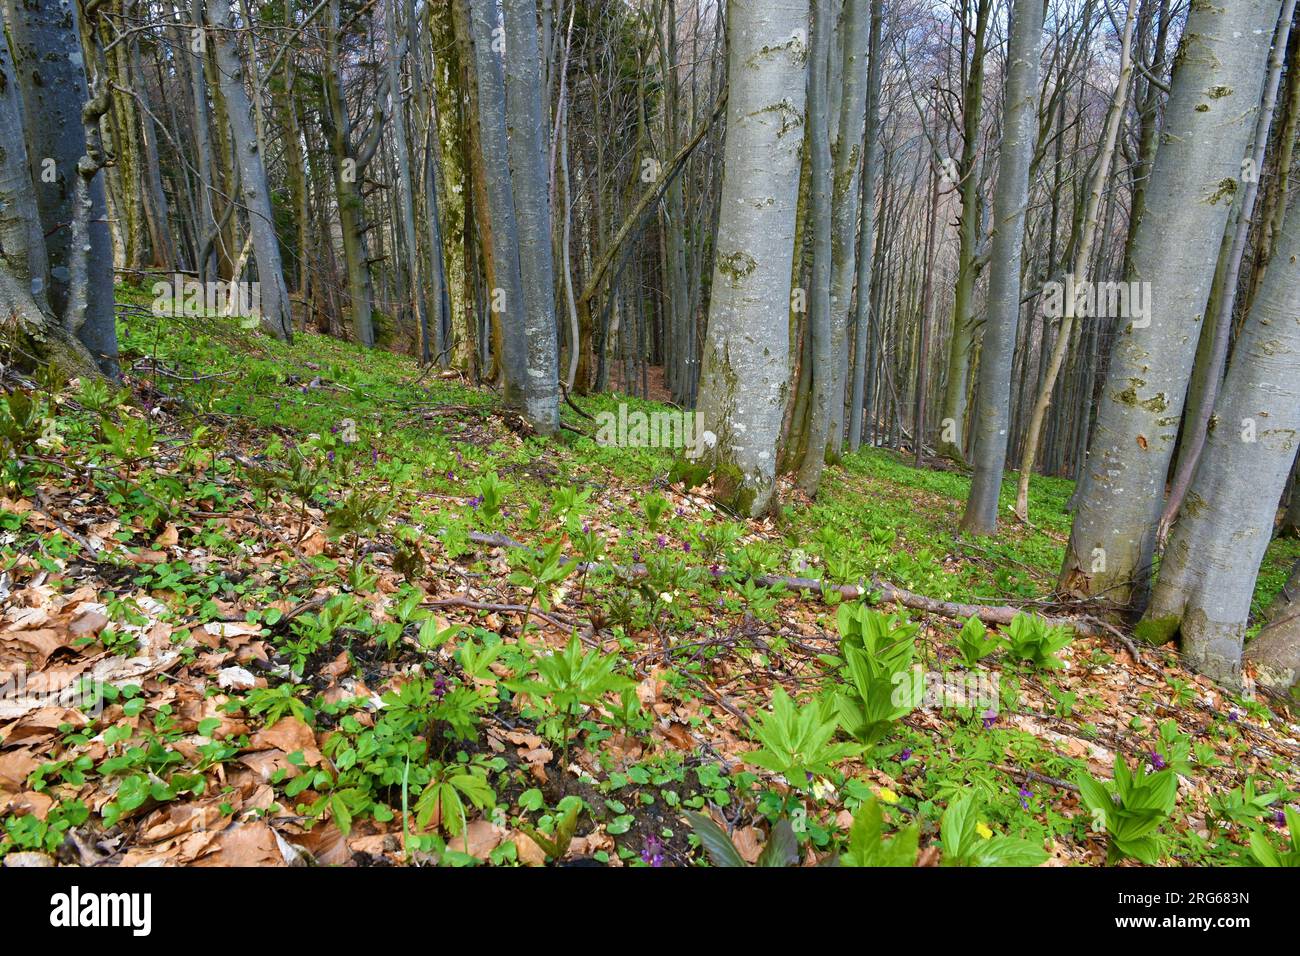 Beech forest in spring with Cardamine enneaphyllos plants covering the ground Stock Photo